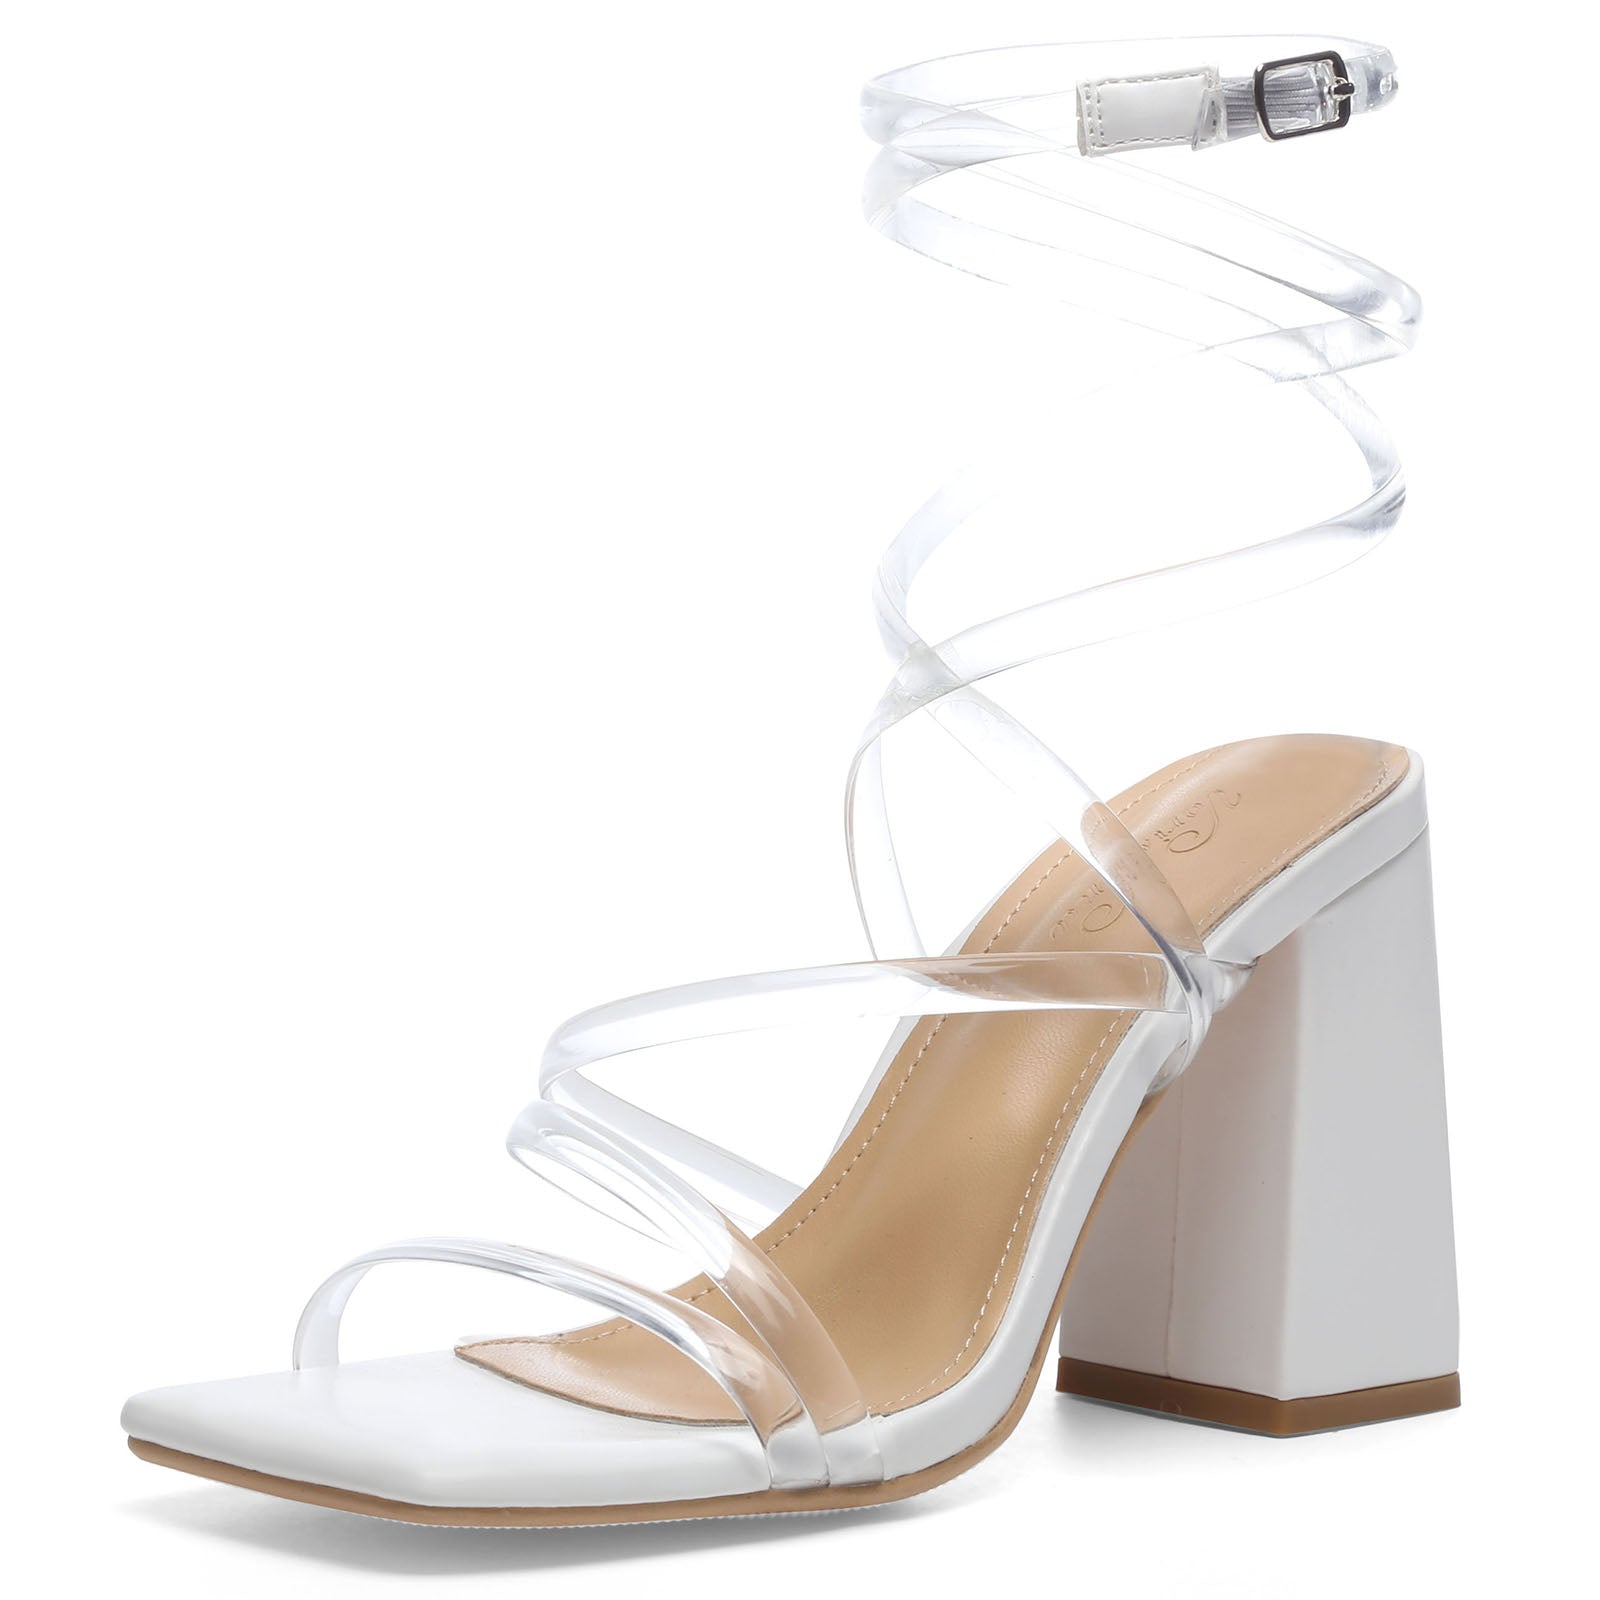 Iridescent Strap Shoes with Clear Heels - Harmonygirl.com